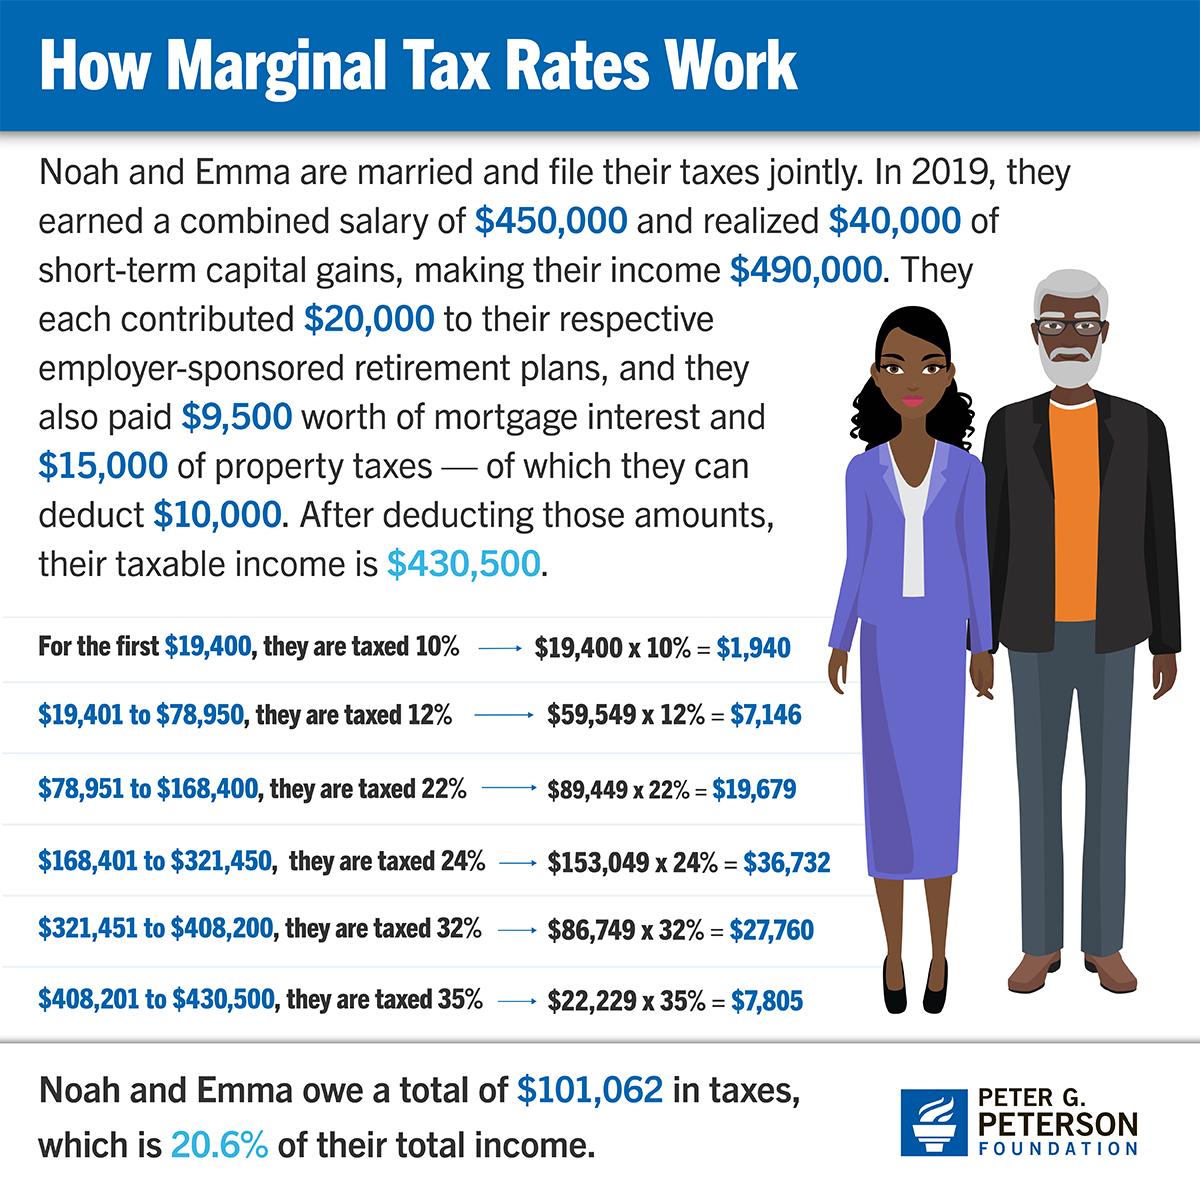 Four Simple Scenarios That Show How Marginal Rates and Tax Breaks Affect What People Actually Pay